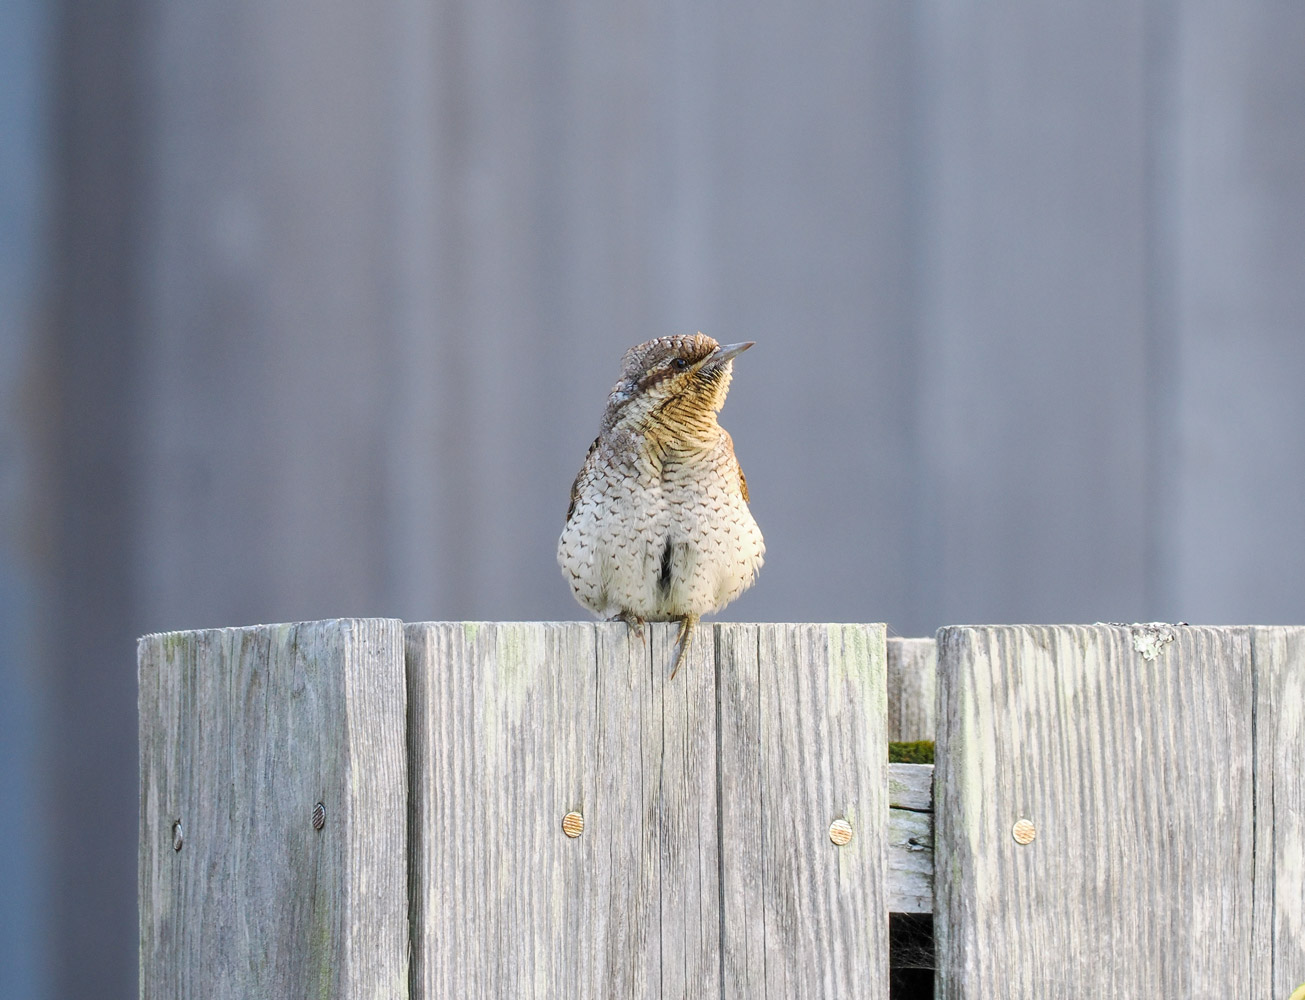 Ben Reavey's photograph of a Wryneck is the winner of the 'The Big Country' category.